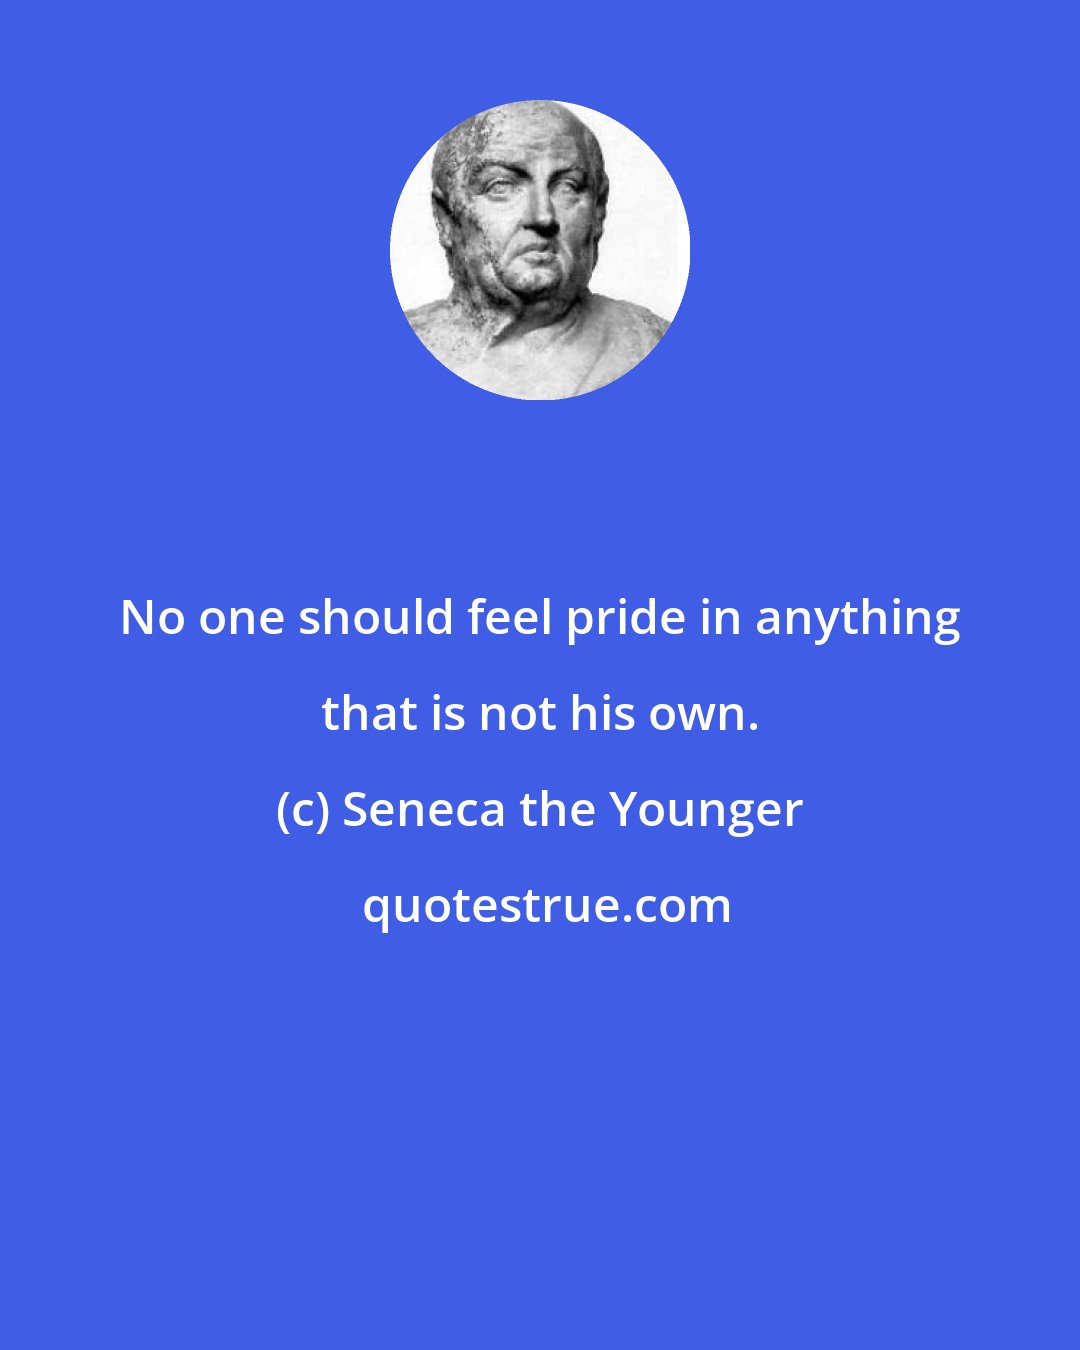 Seneca the Younger: No one should feel pride in anything that is not his own.